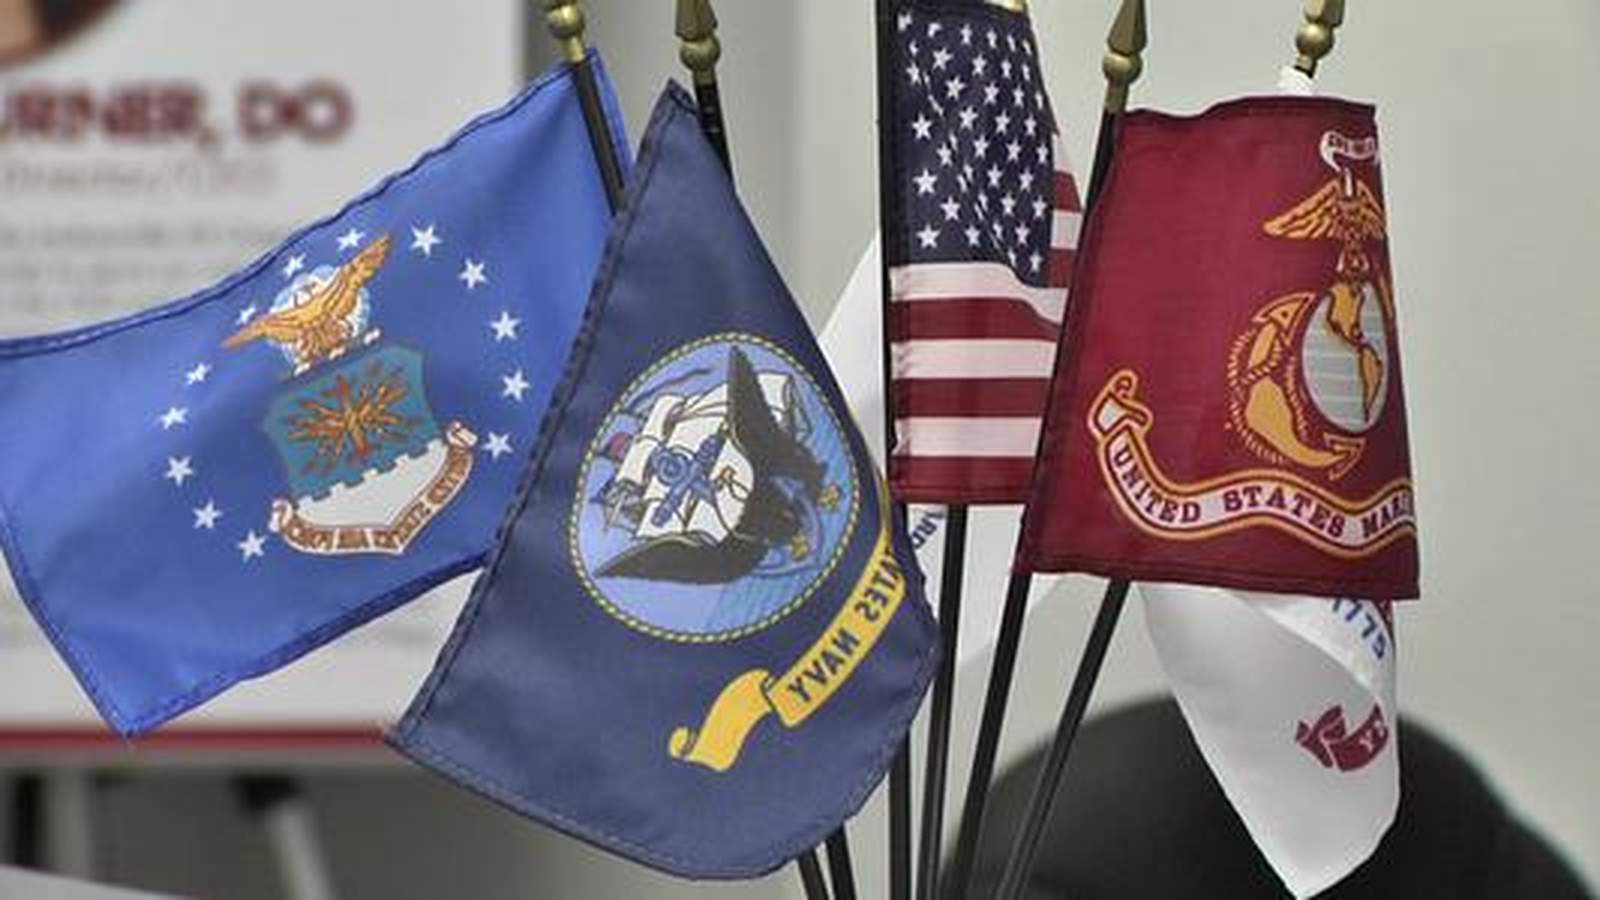 New facility aims to improve health care access for veterans in Northwest Jacksonville